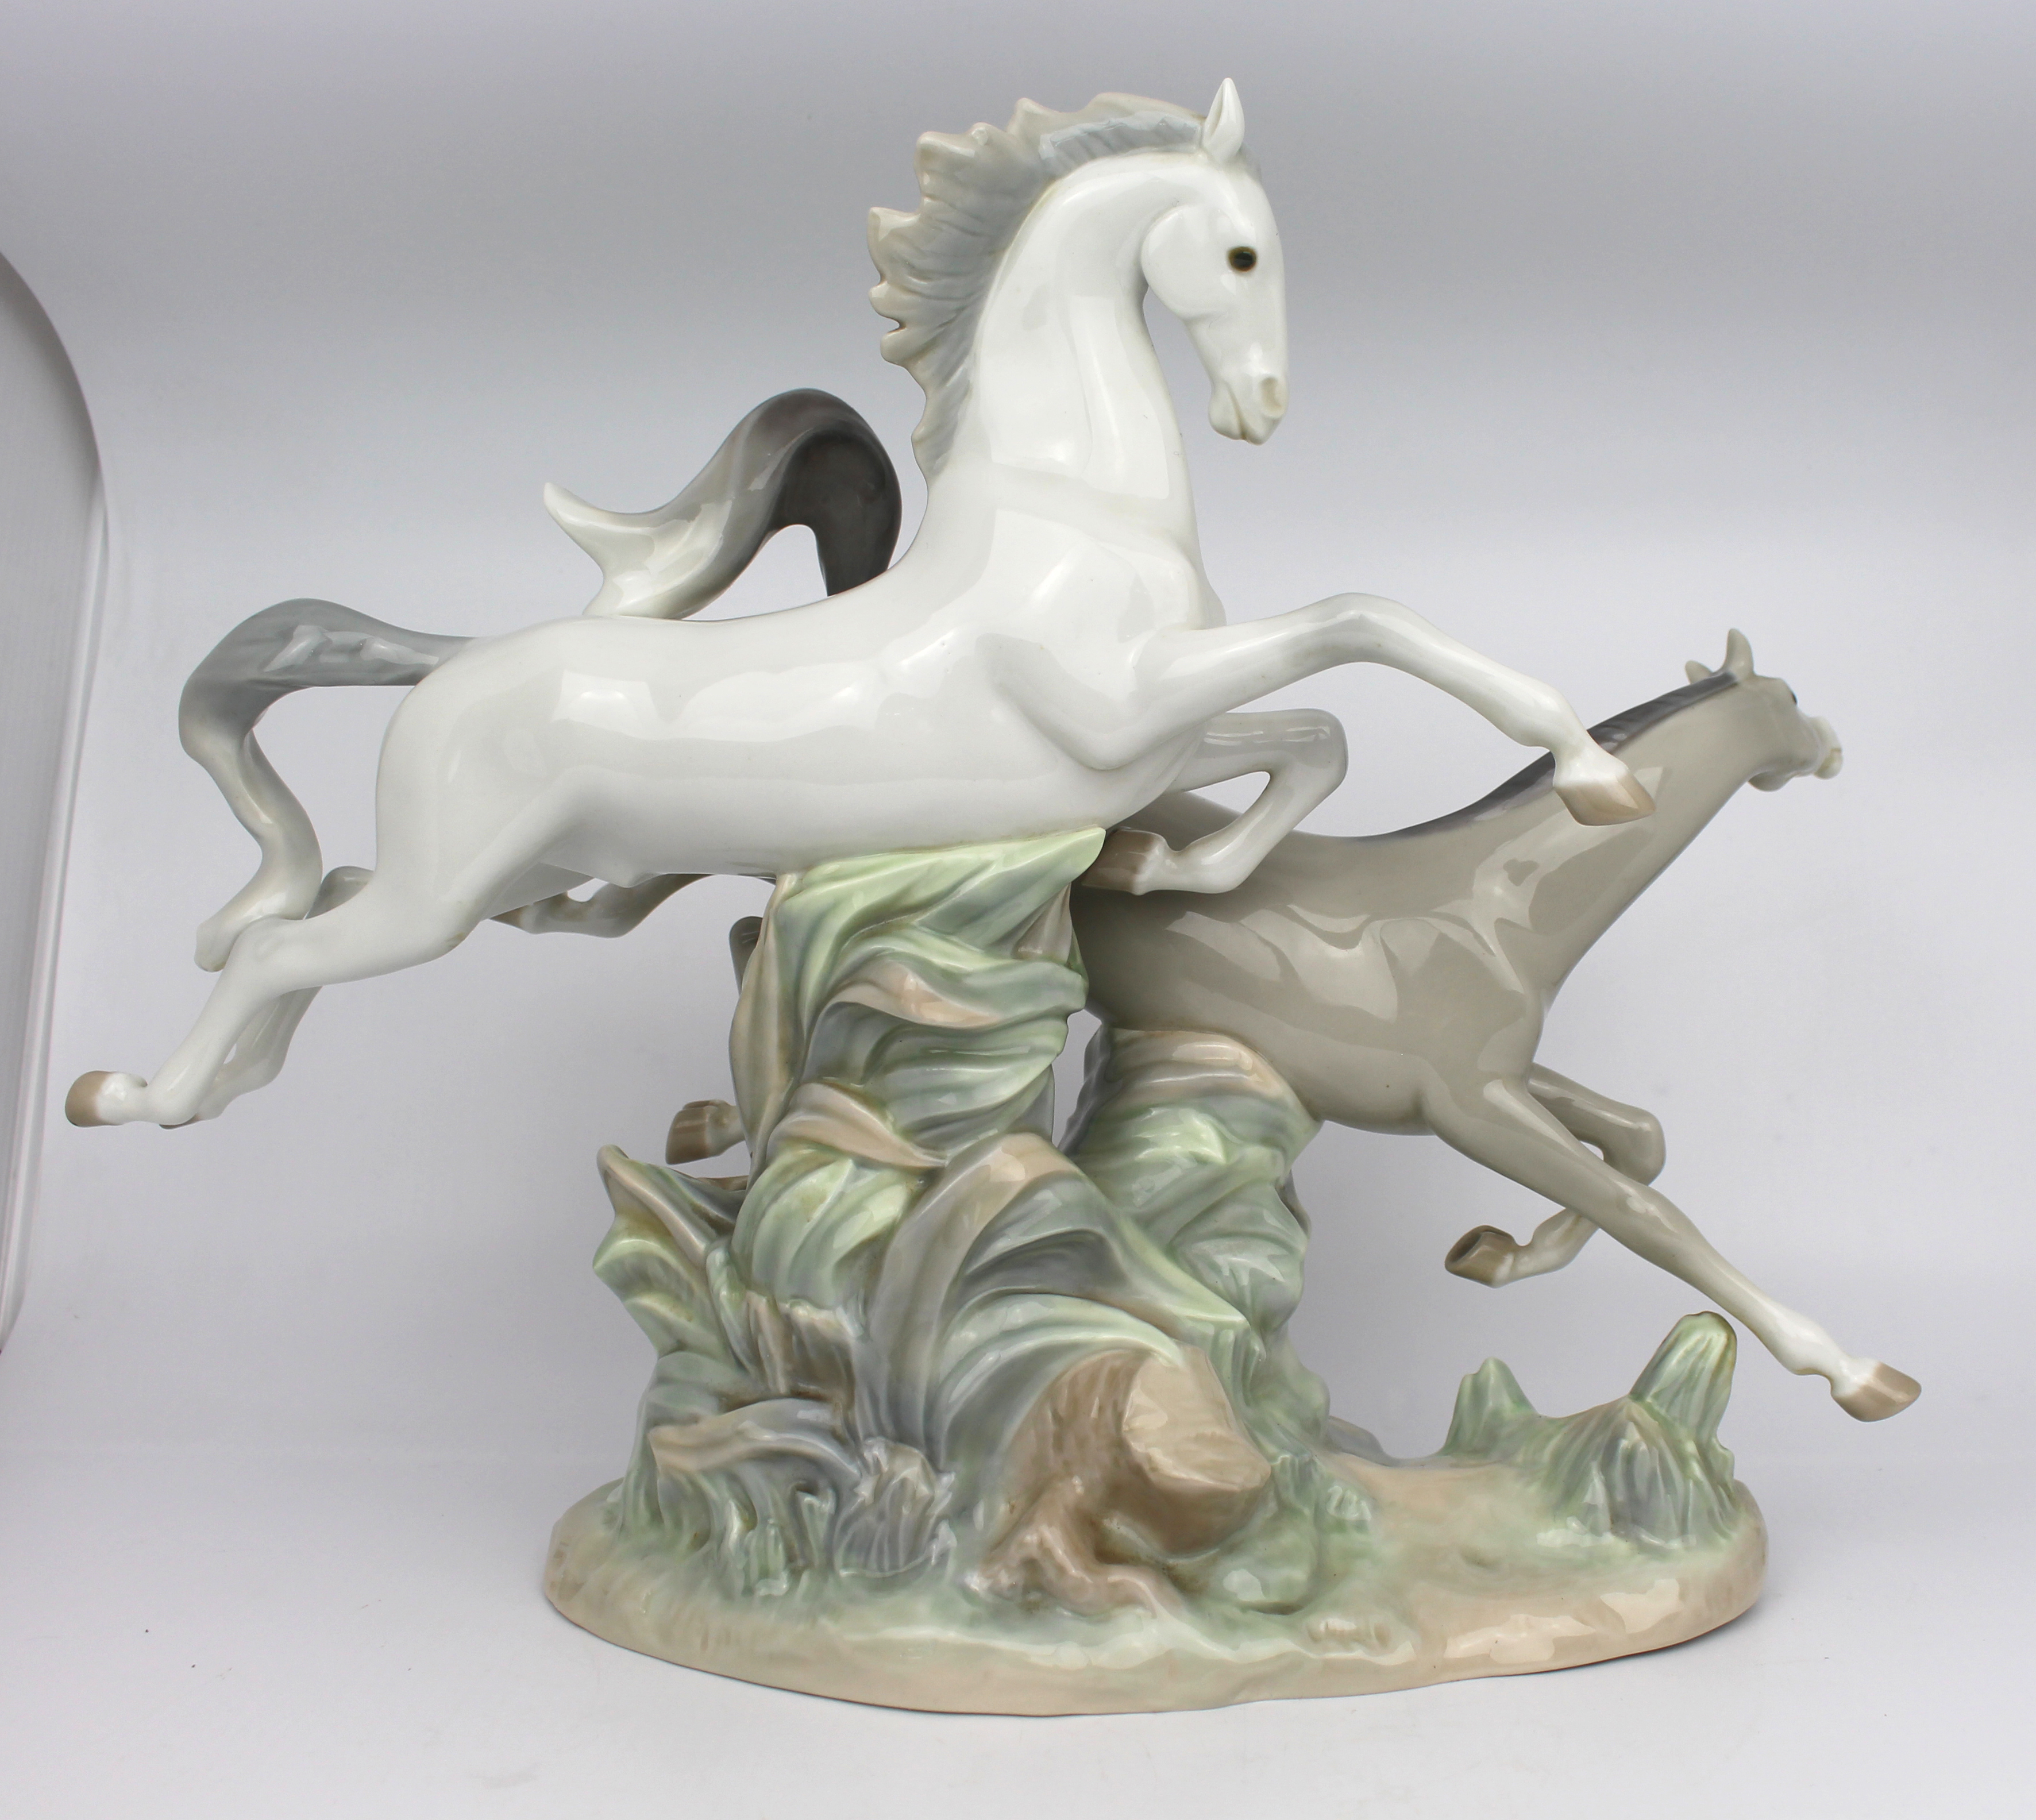 Lladro Horse Group Sculpture - Image 2 of 4